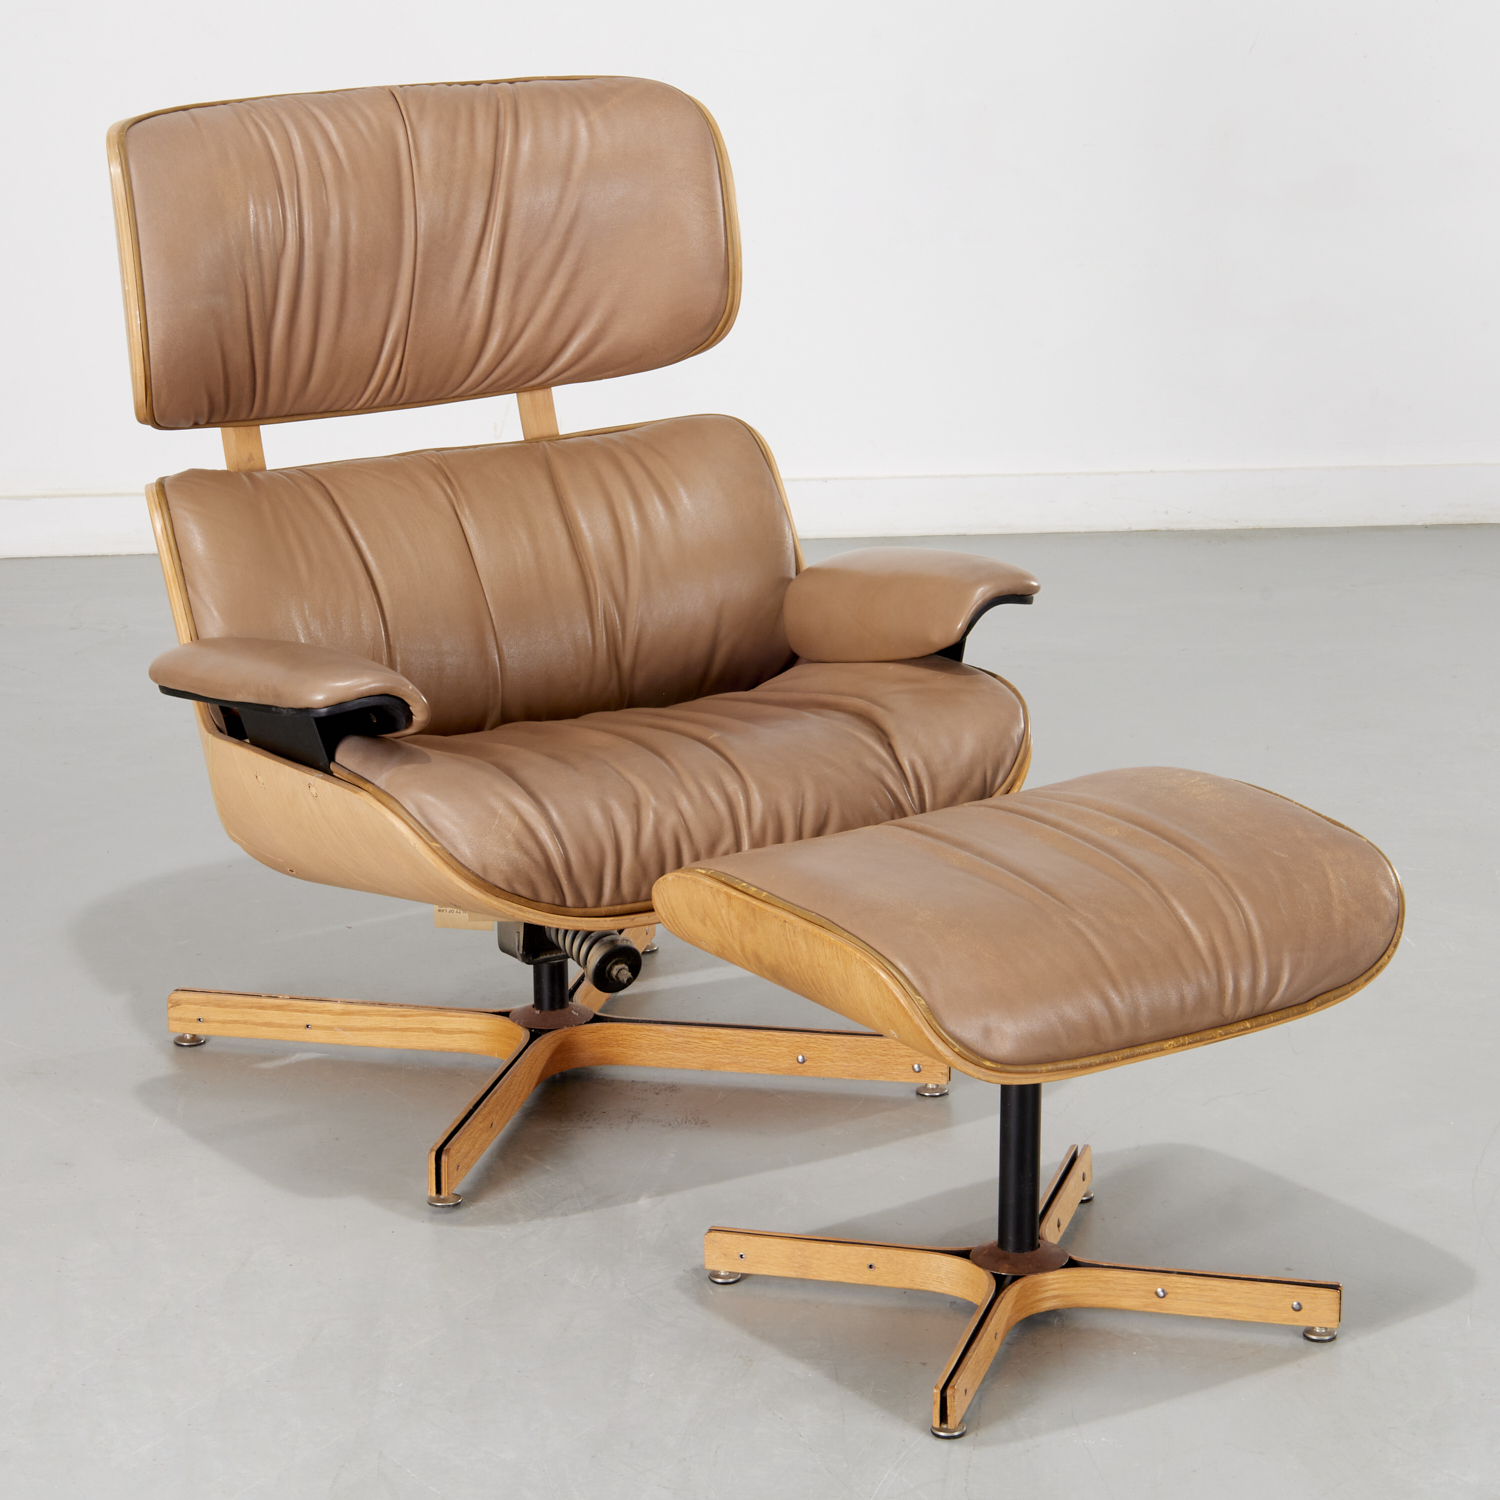 EAMES STYLE PLYCRAFT LOUNGE CHAIR 2fc5d9